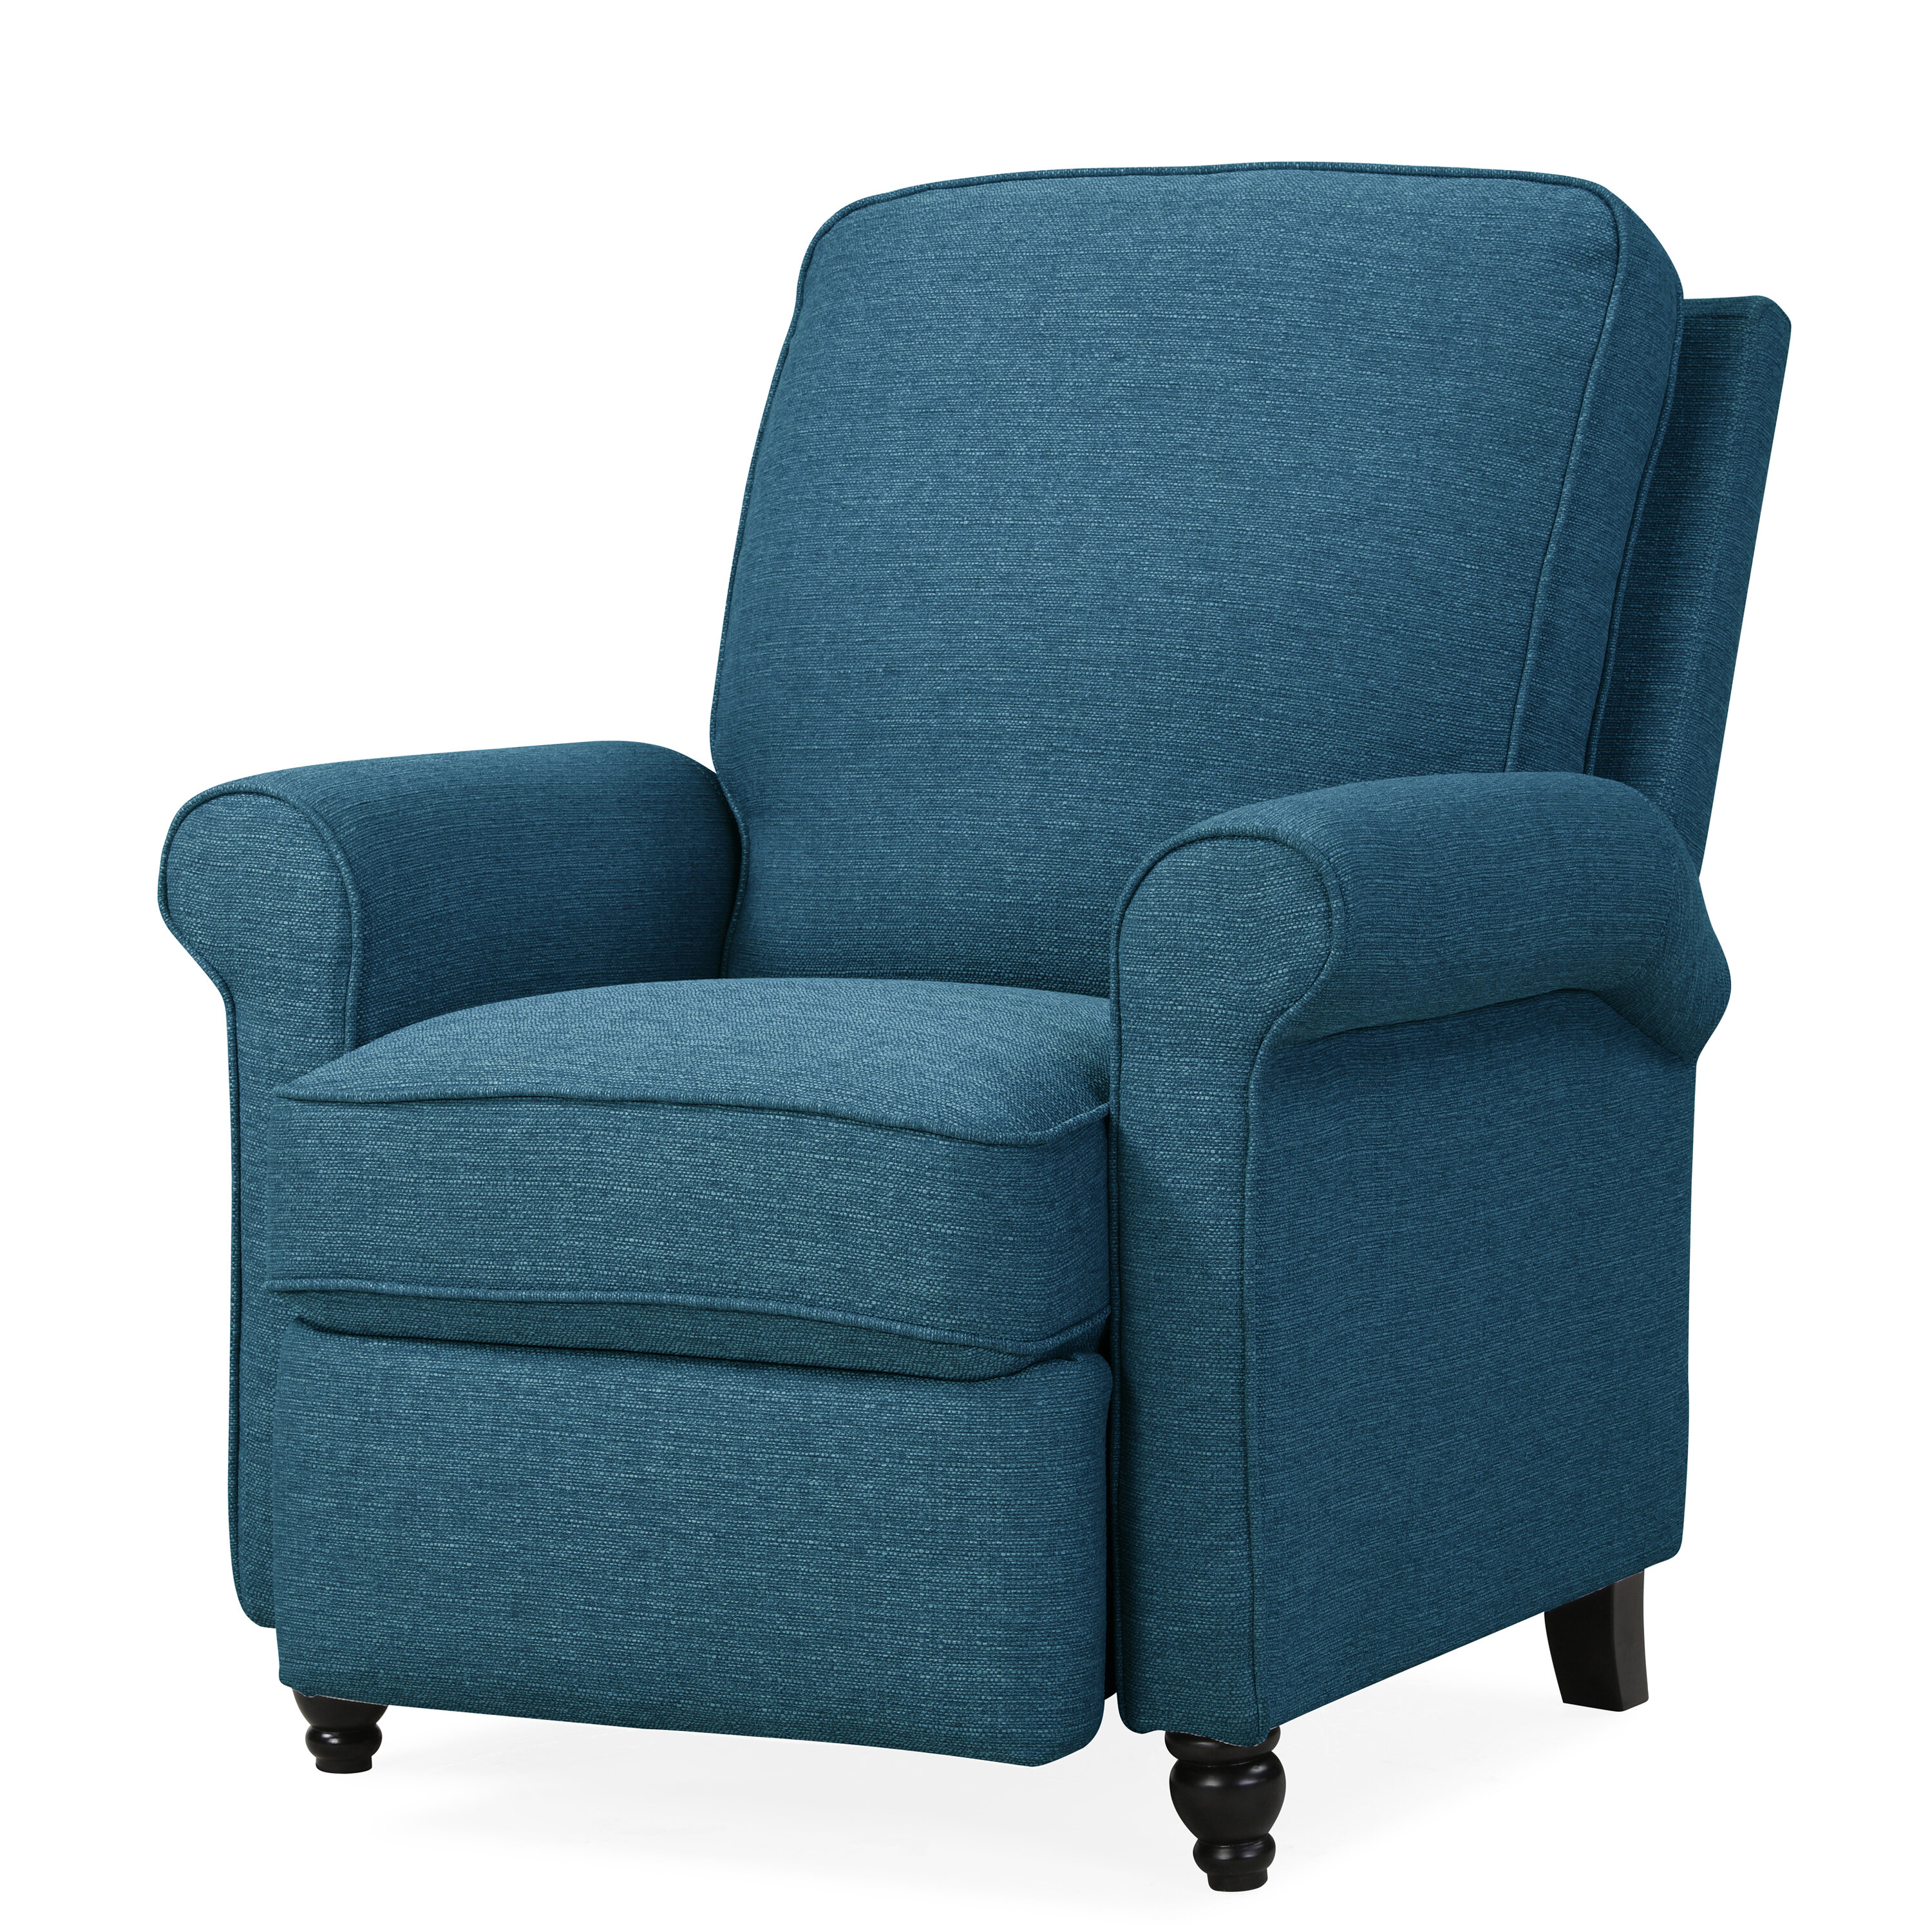 Compact Recliner Chairs Canada | Recliner Chair